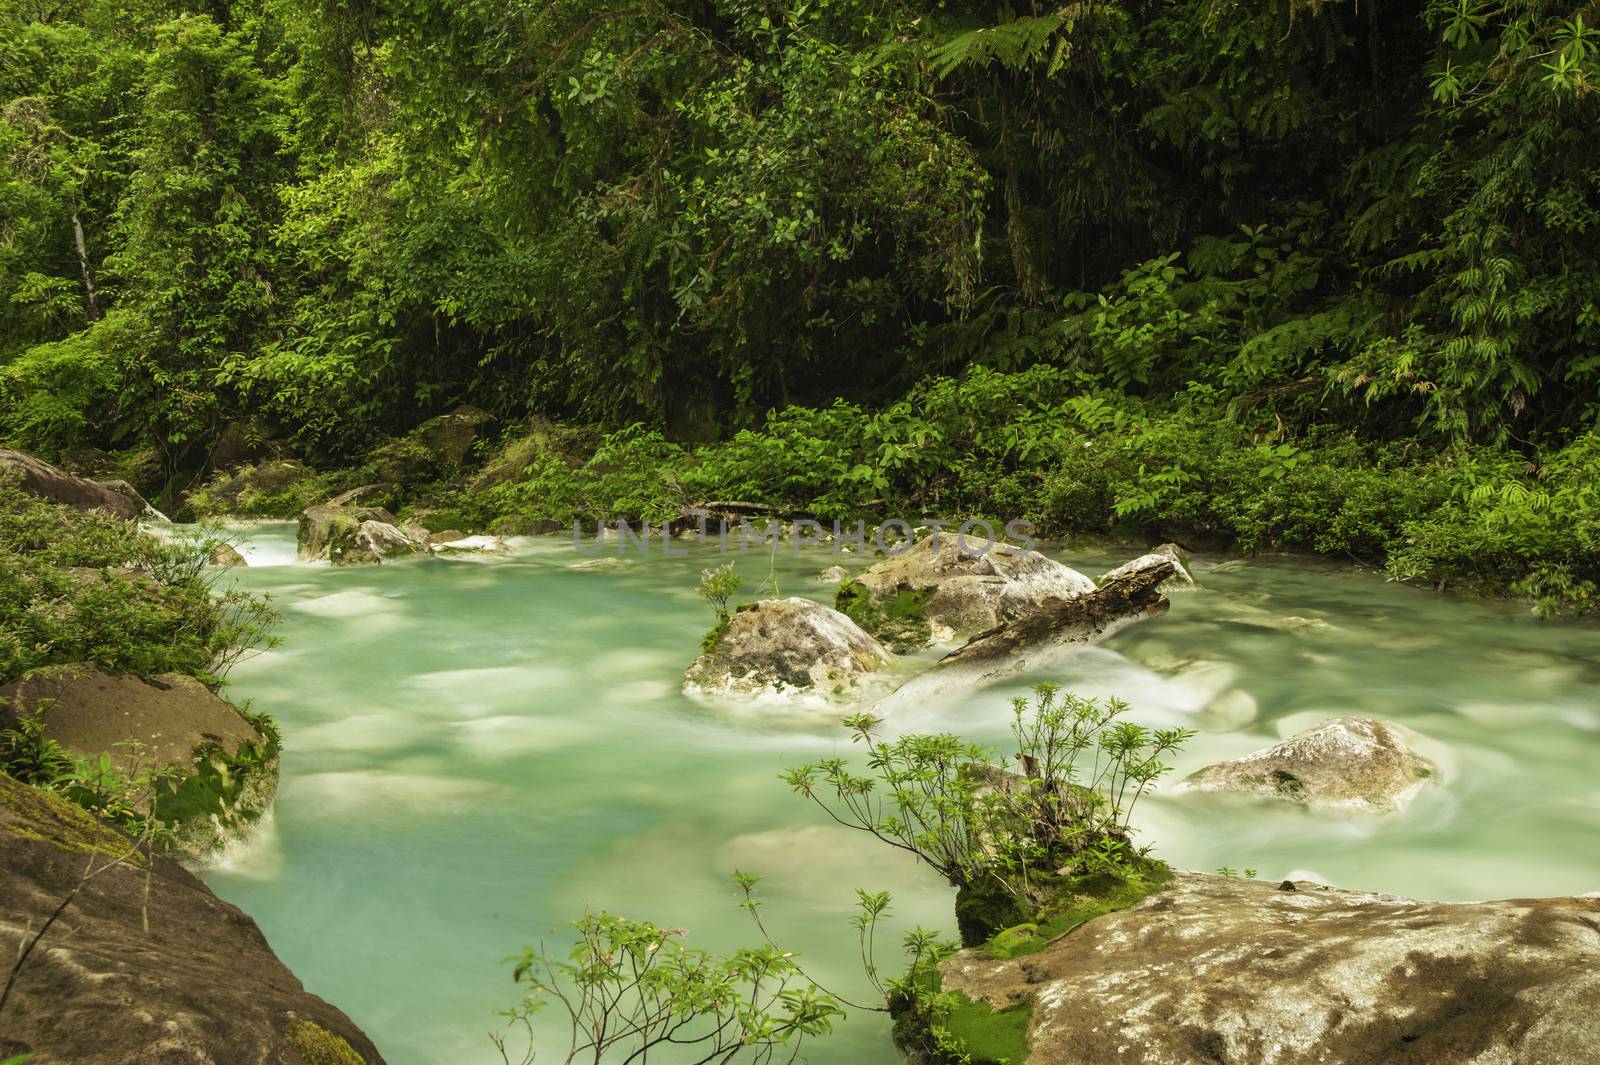 Chemicals contained within the waters of two rivers react to create the vivid blue color of Rio Celeste in Costa Rica.